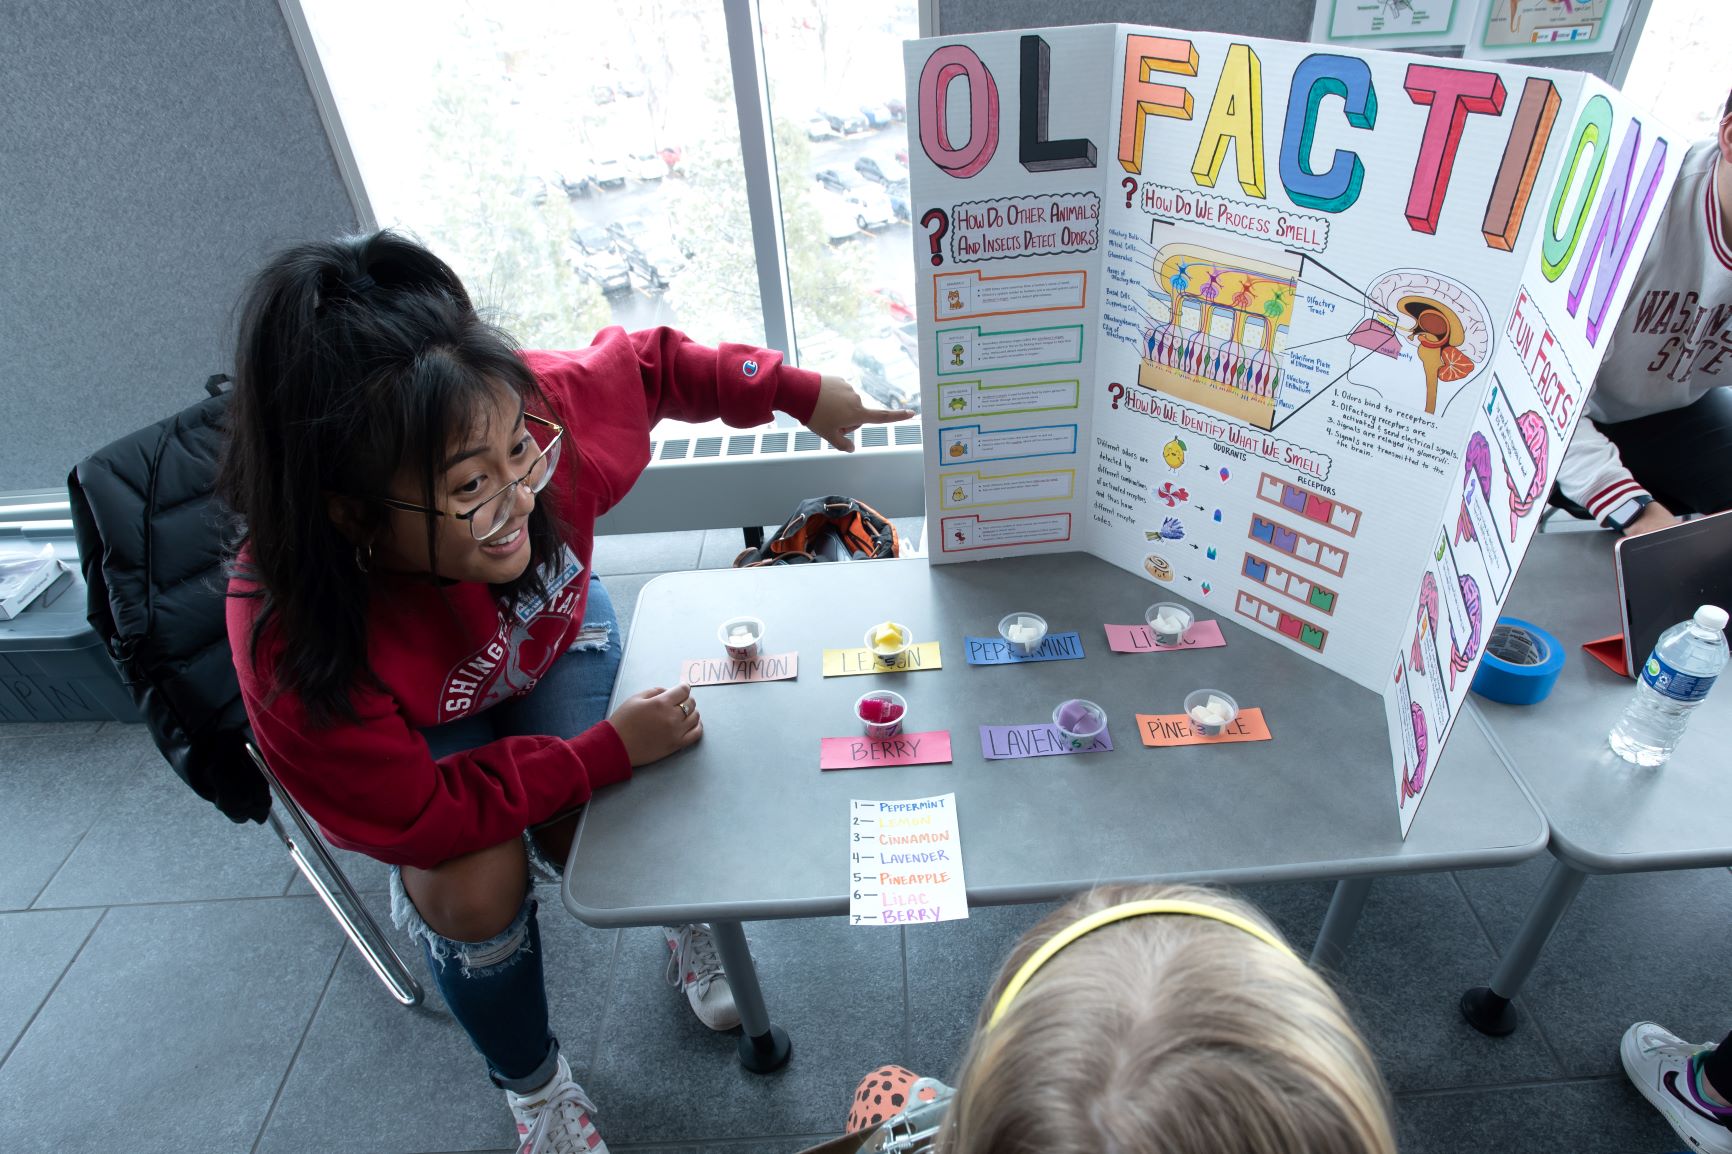 WSU student leans forward to welcome a elementary school student to their table at the Neuroscience Fair.